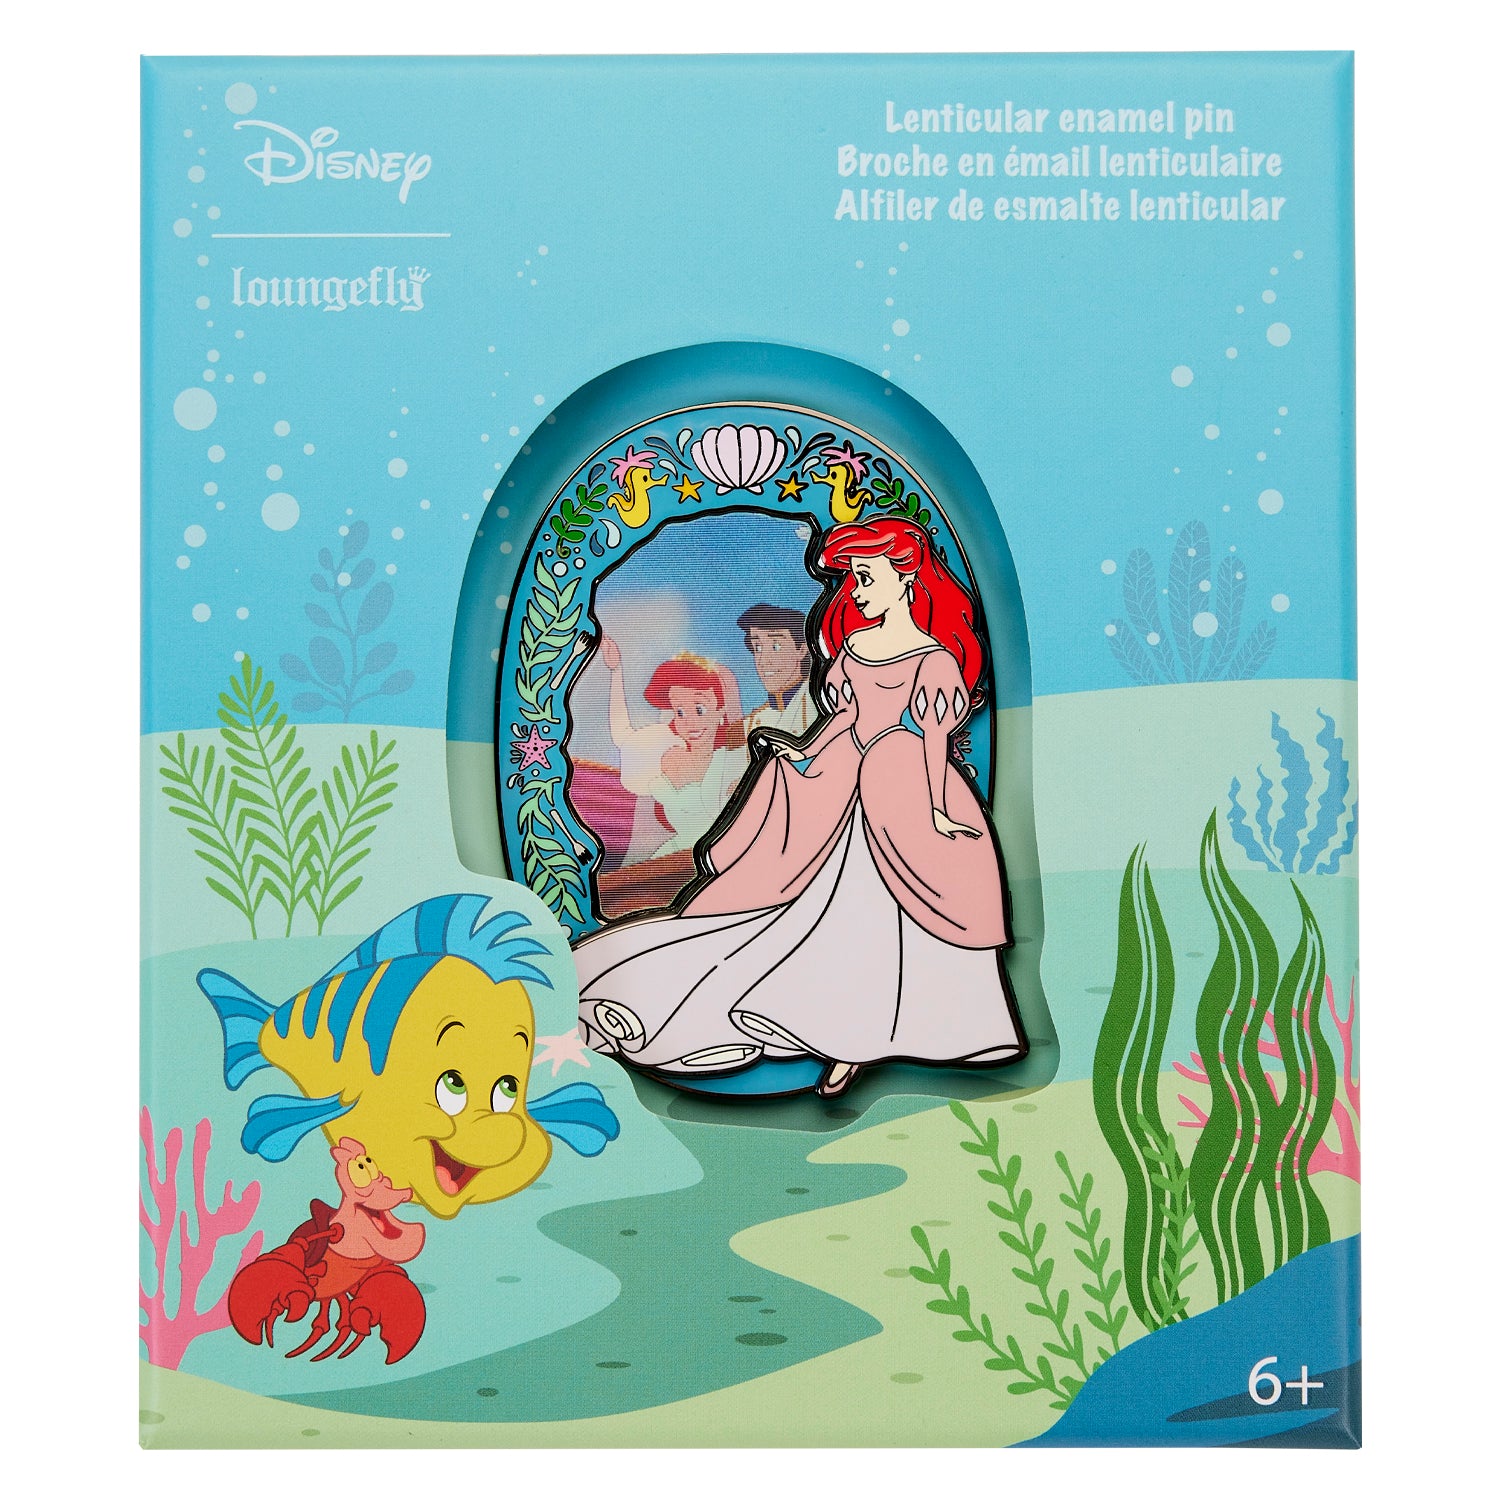 Loungefly Disney Little Mermaid Princess Lenticular 3" Limited Edition Collector Box Pin  - *PREORDER*